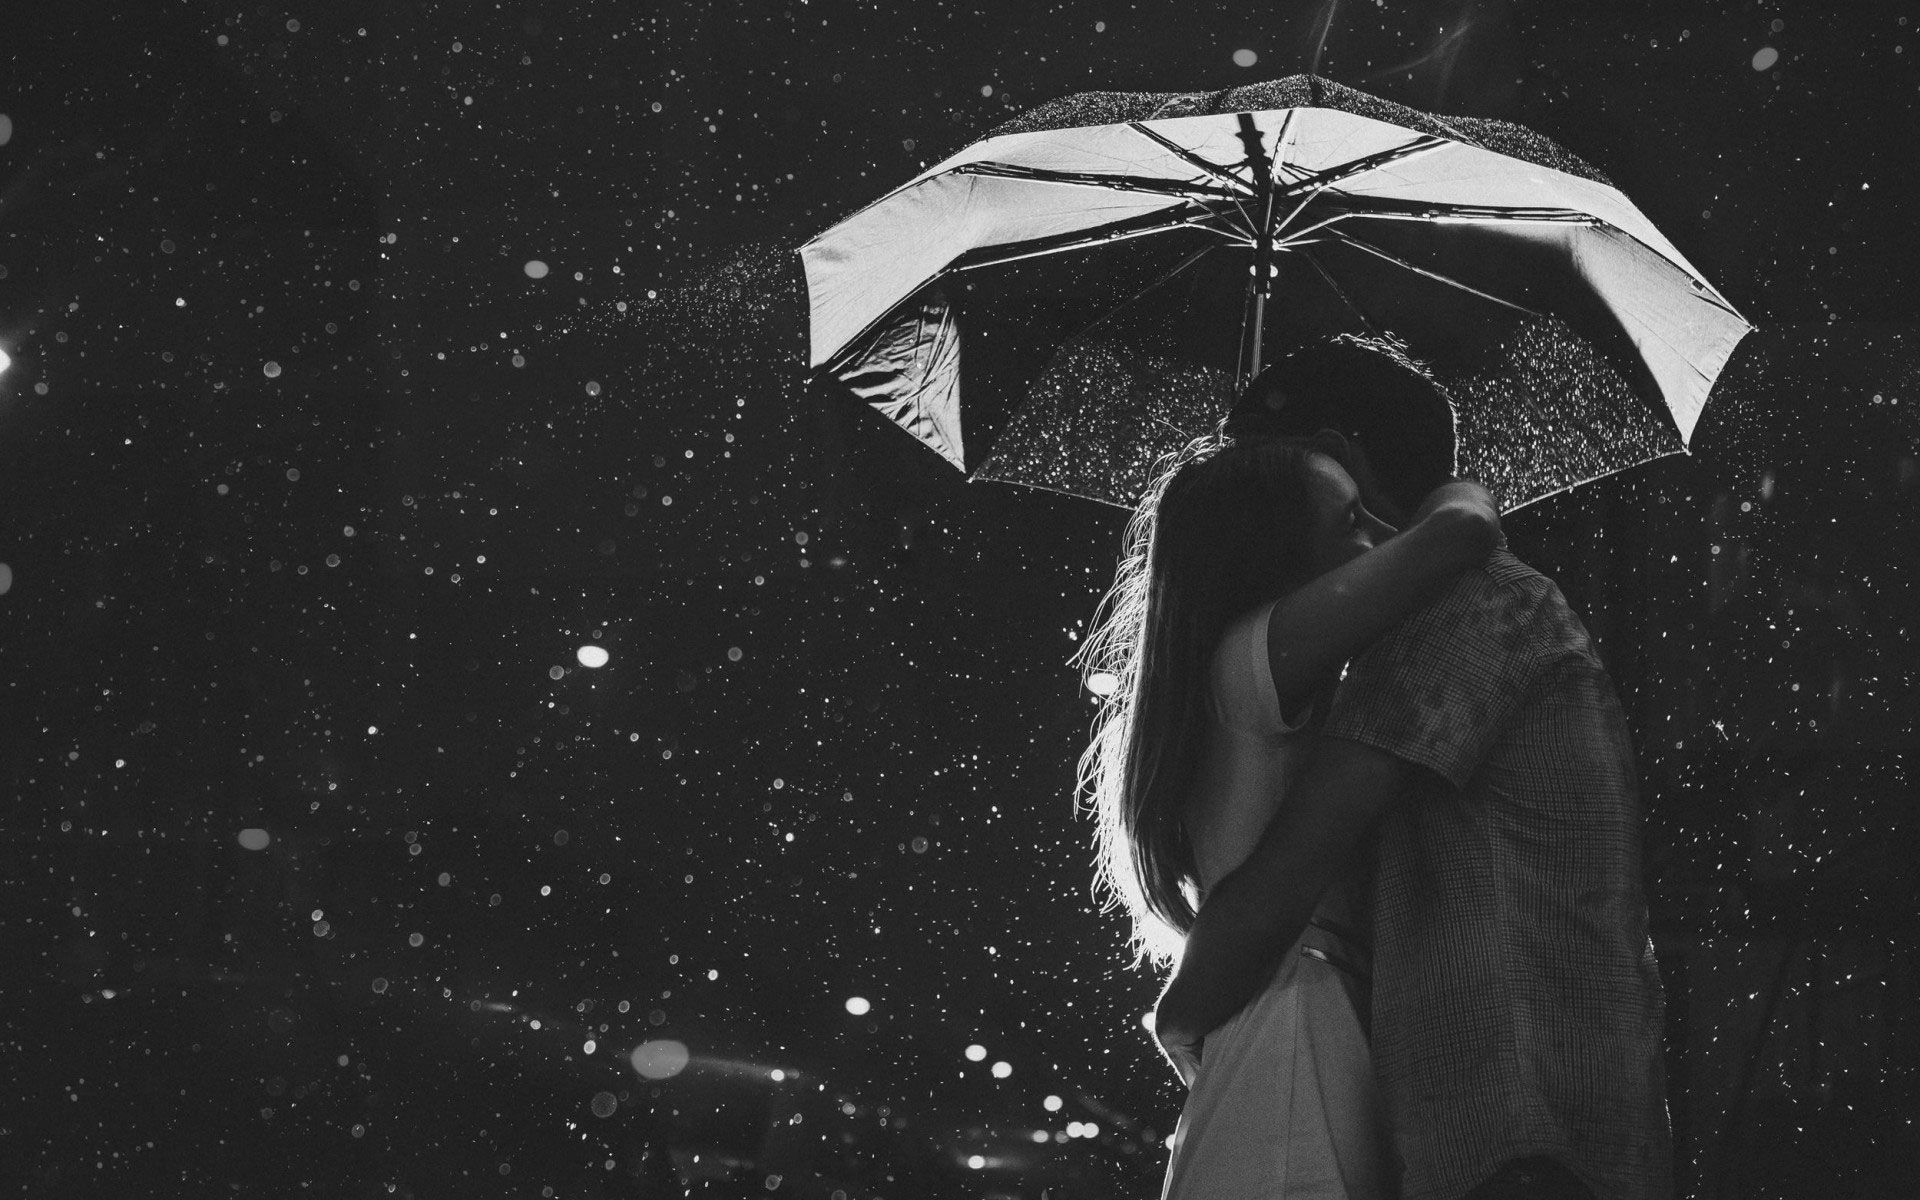 Sweet Black and White Romance Wallpaper of Love Couples. Couple in rain, Rain wallpaper, Love wallpaper